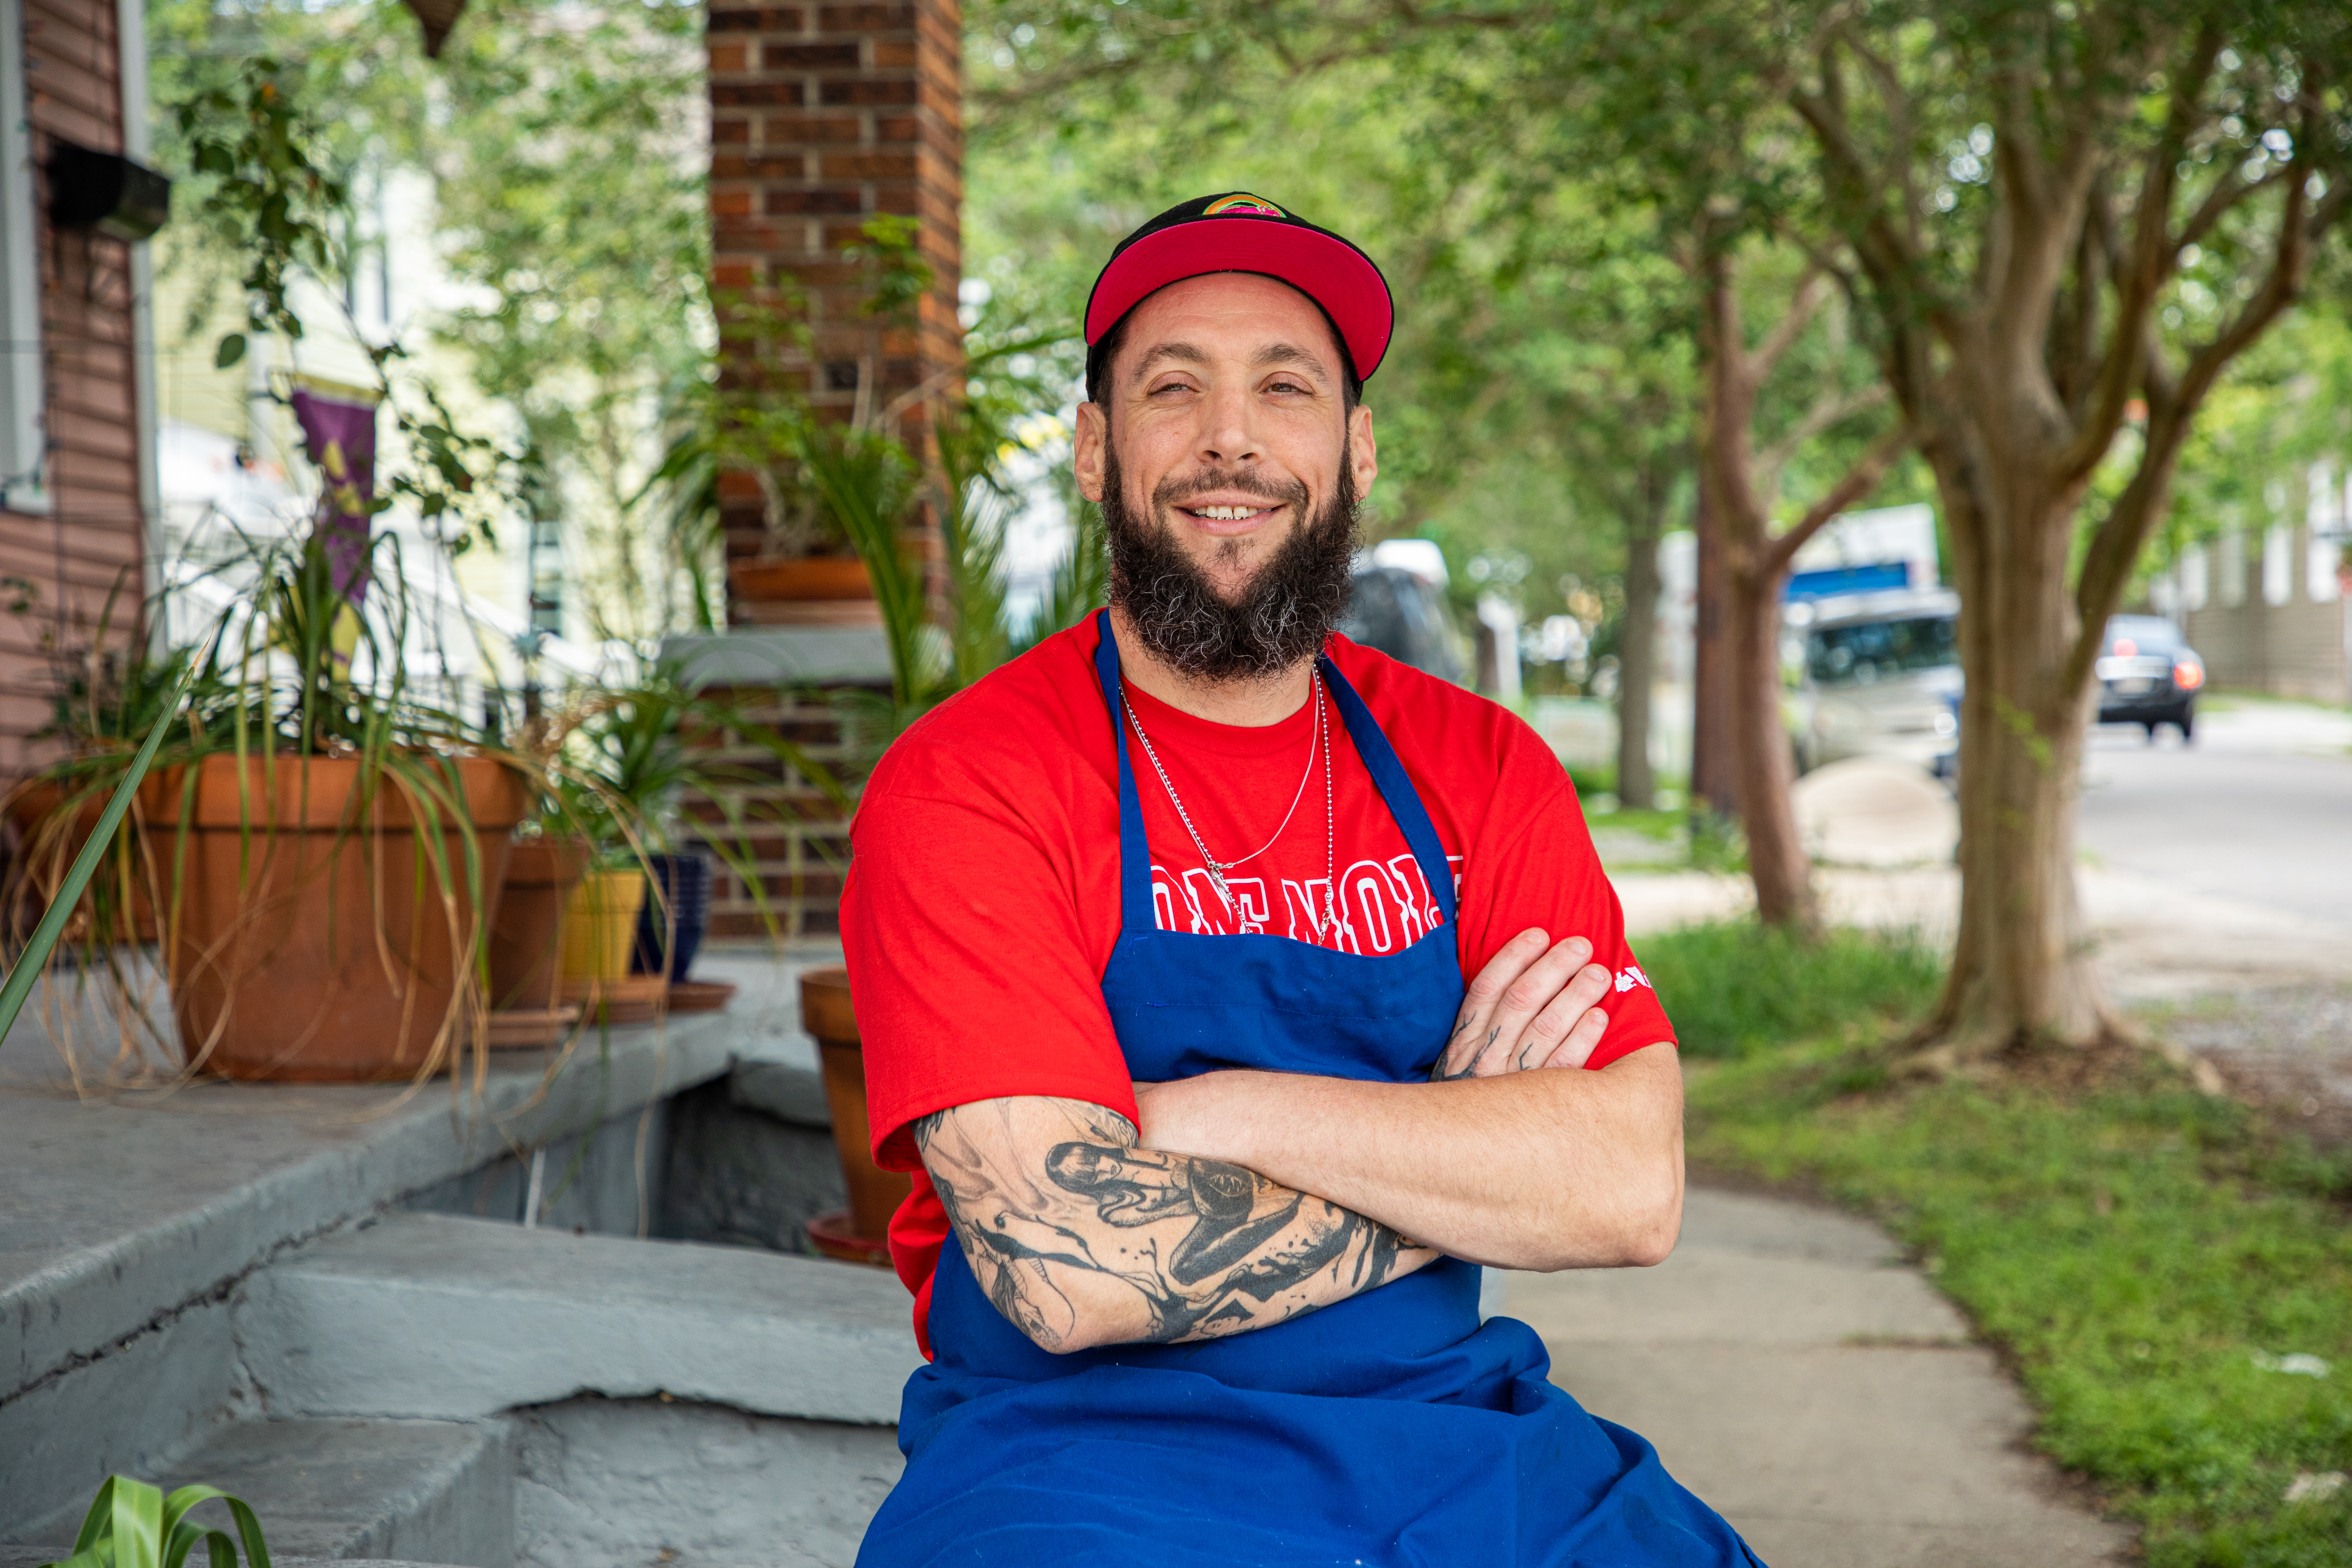 A smiling white man with one tattooed forearm sits with his arms crossed on a stoop wearing a red t-shirt and blue apron.